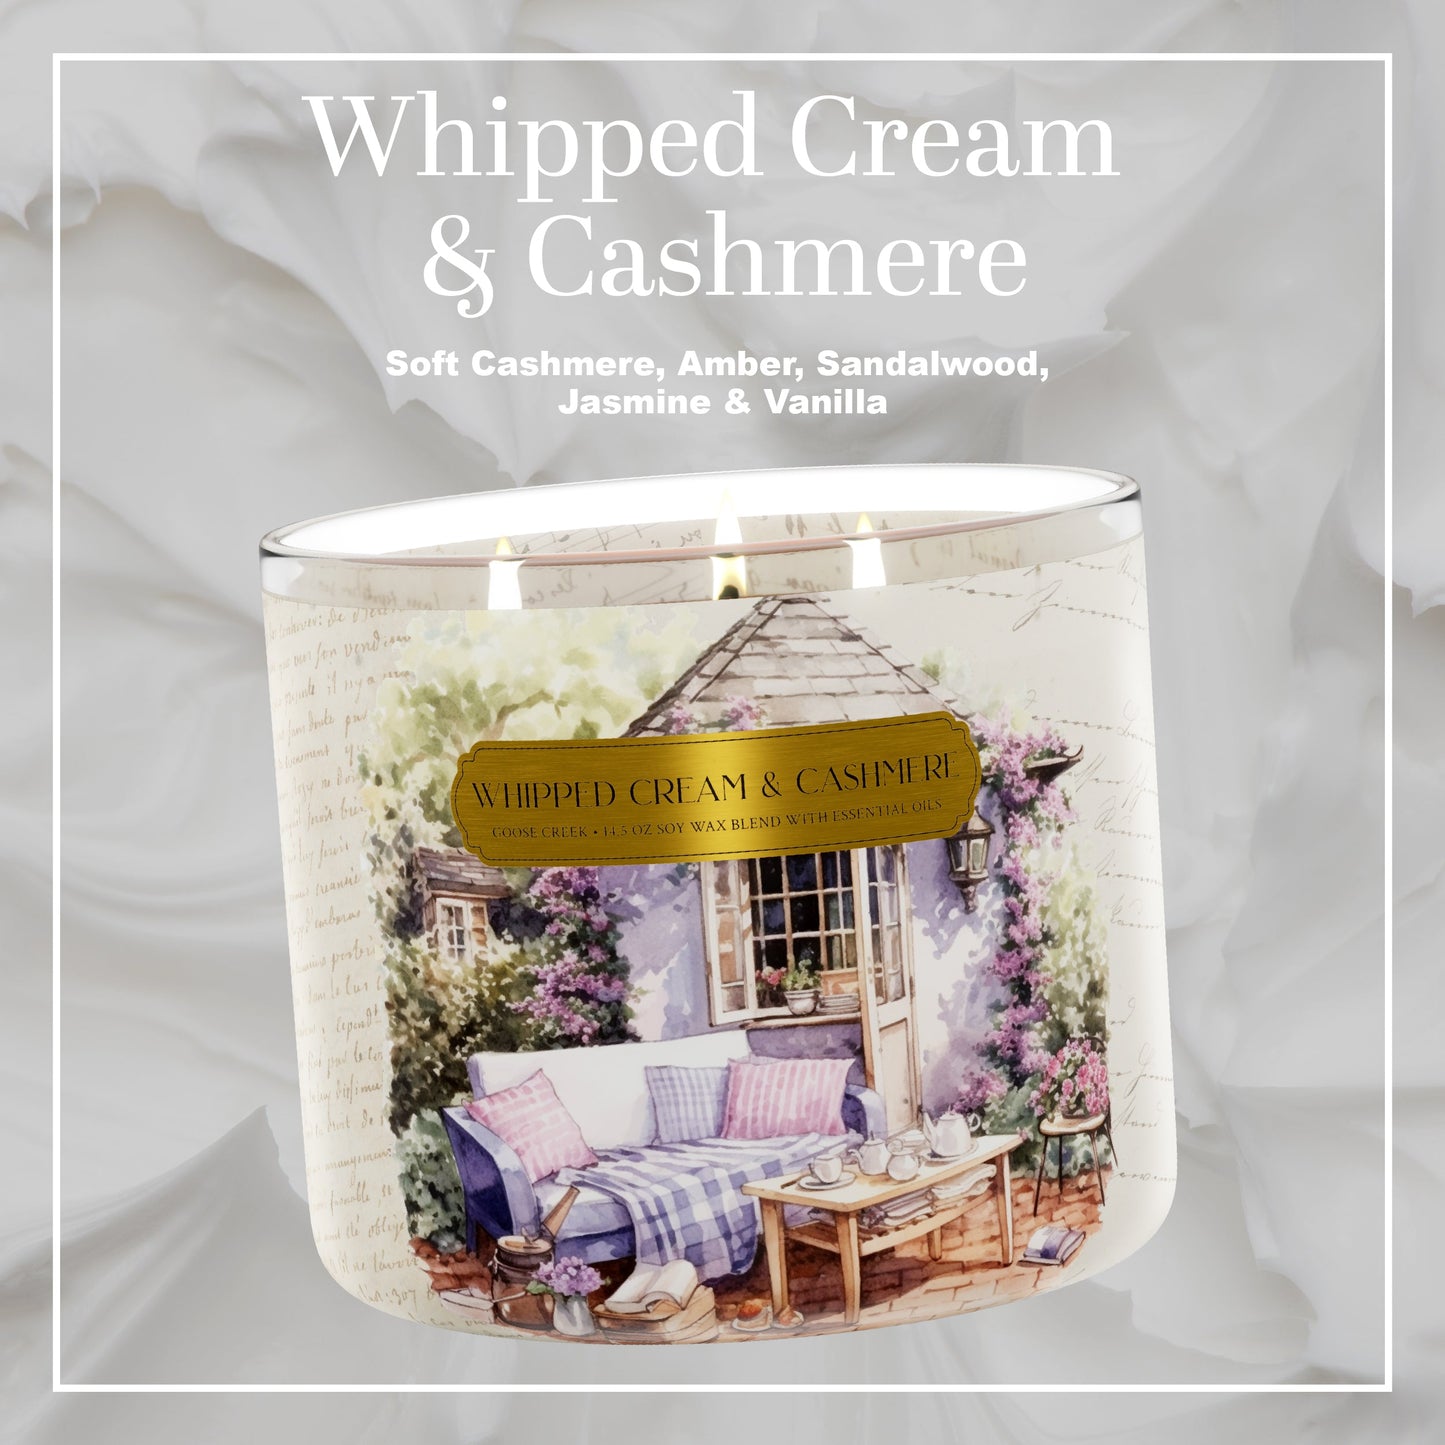 Whipped Cream & Cashmere Large 3-Wick Candle